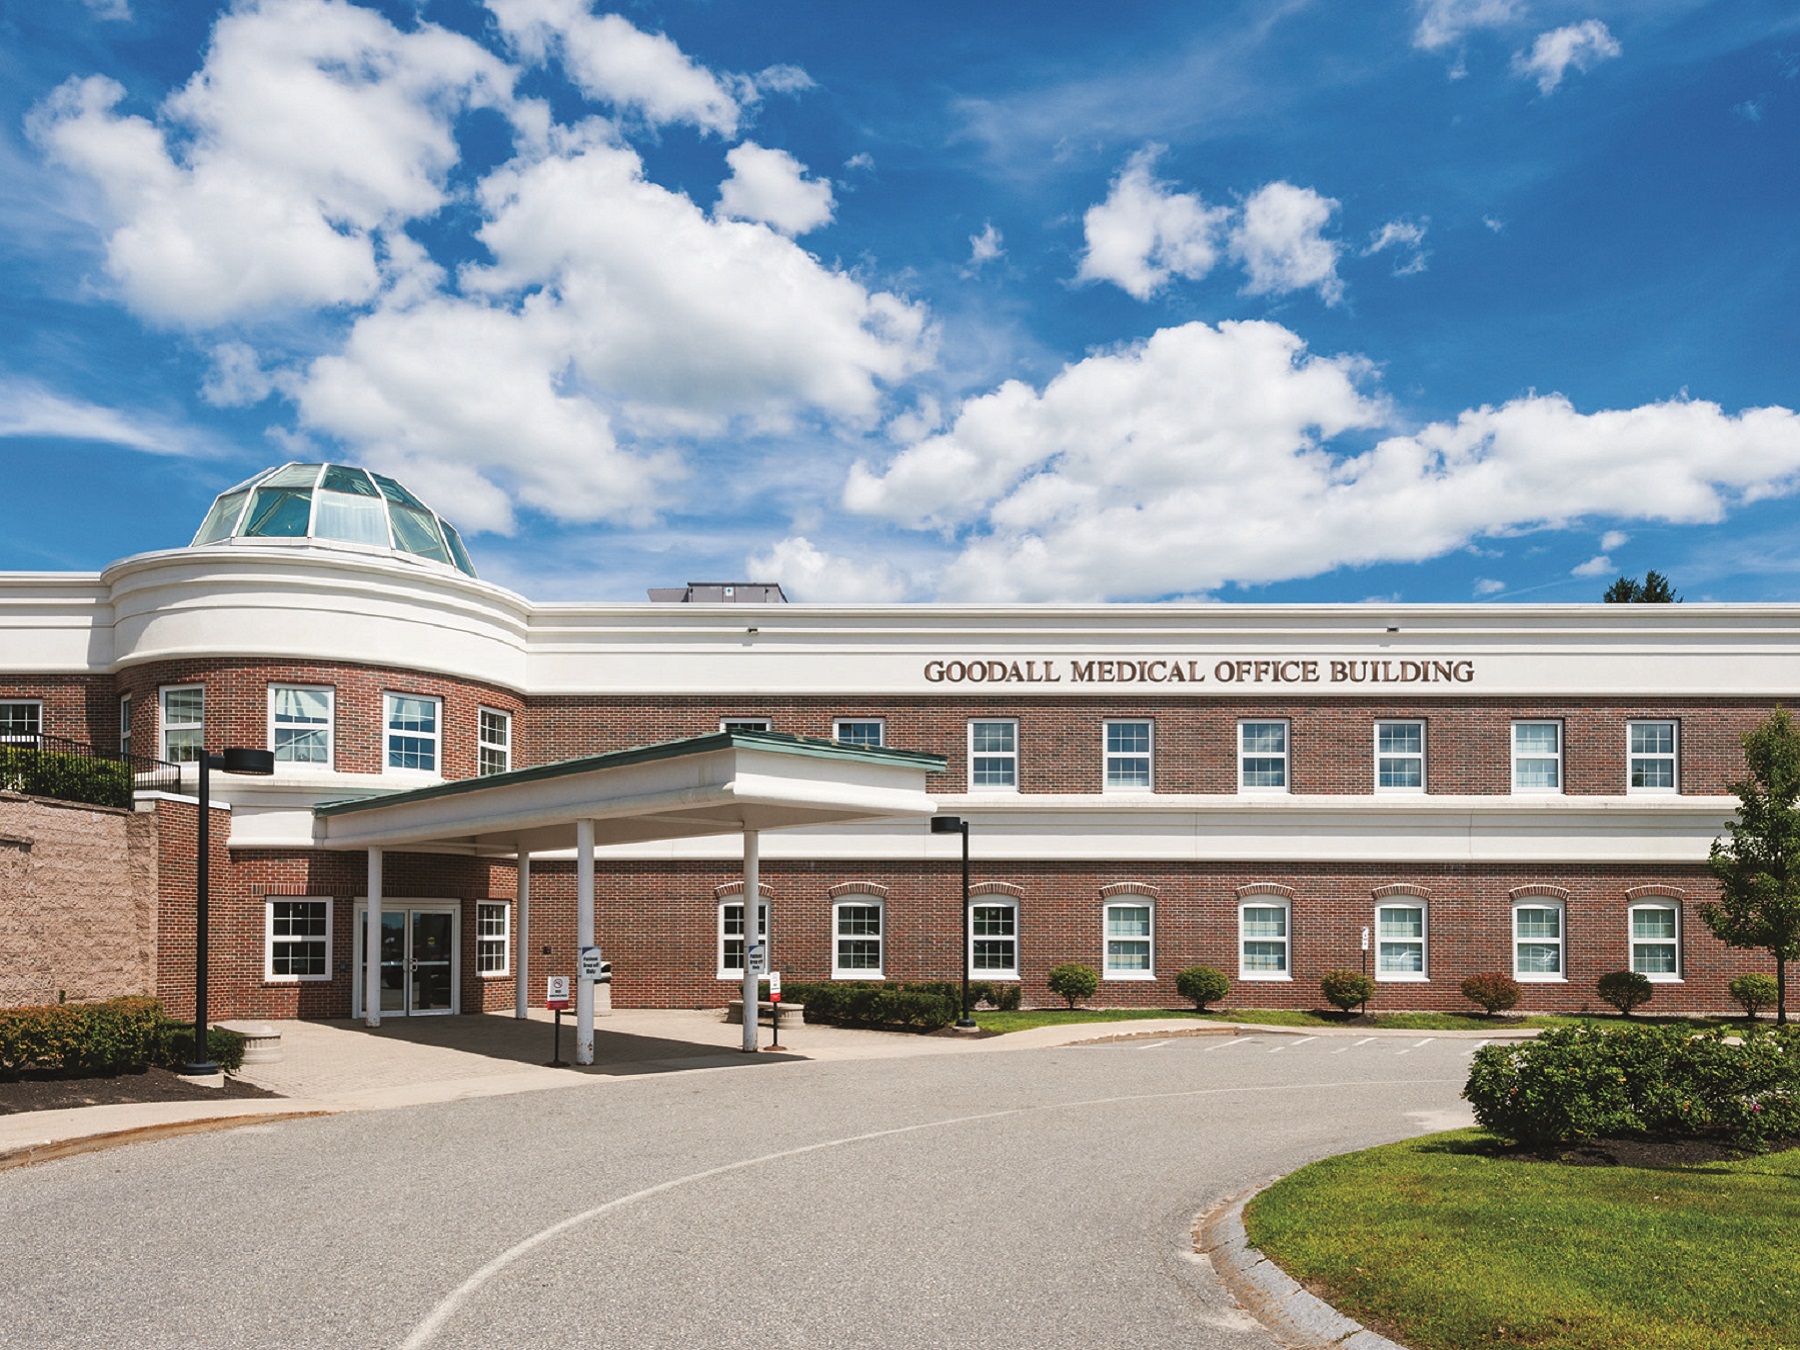 Southern Maine Health Care Family Medicine Is Located At 25A June St., Suite 111, Sanford, ME